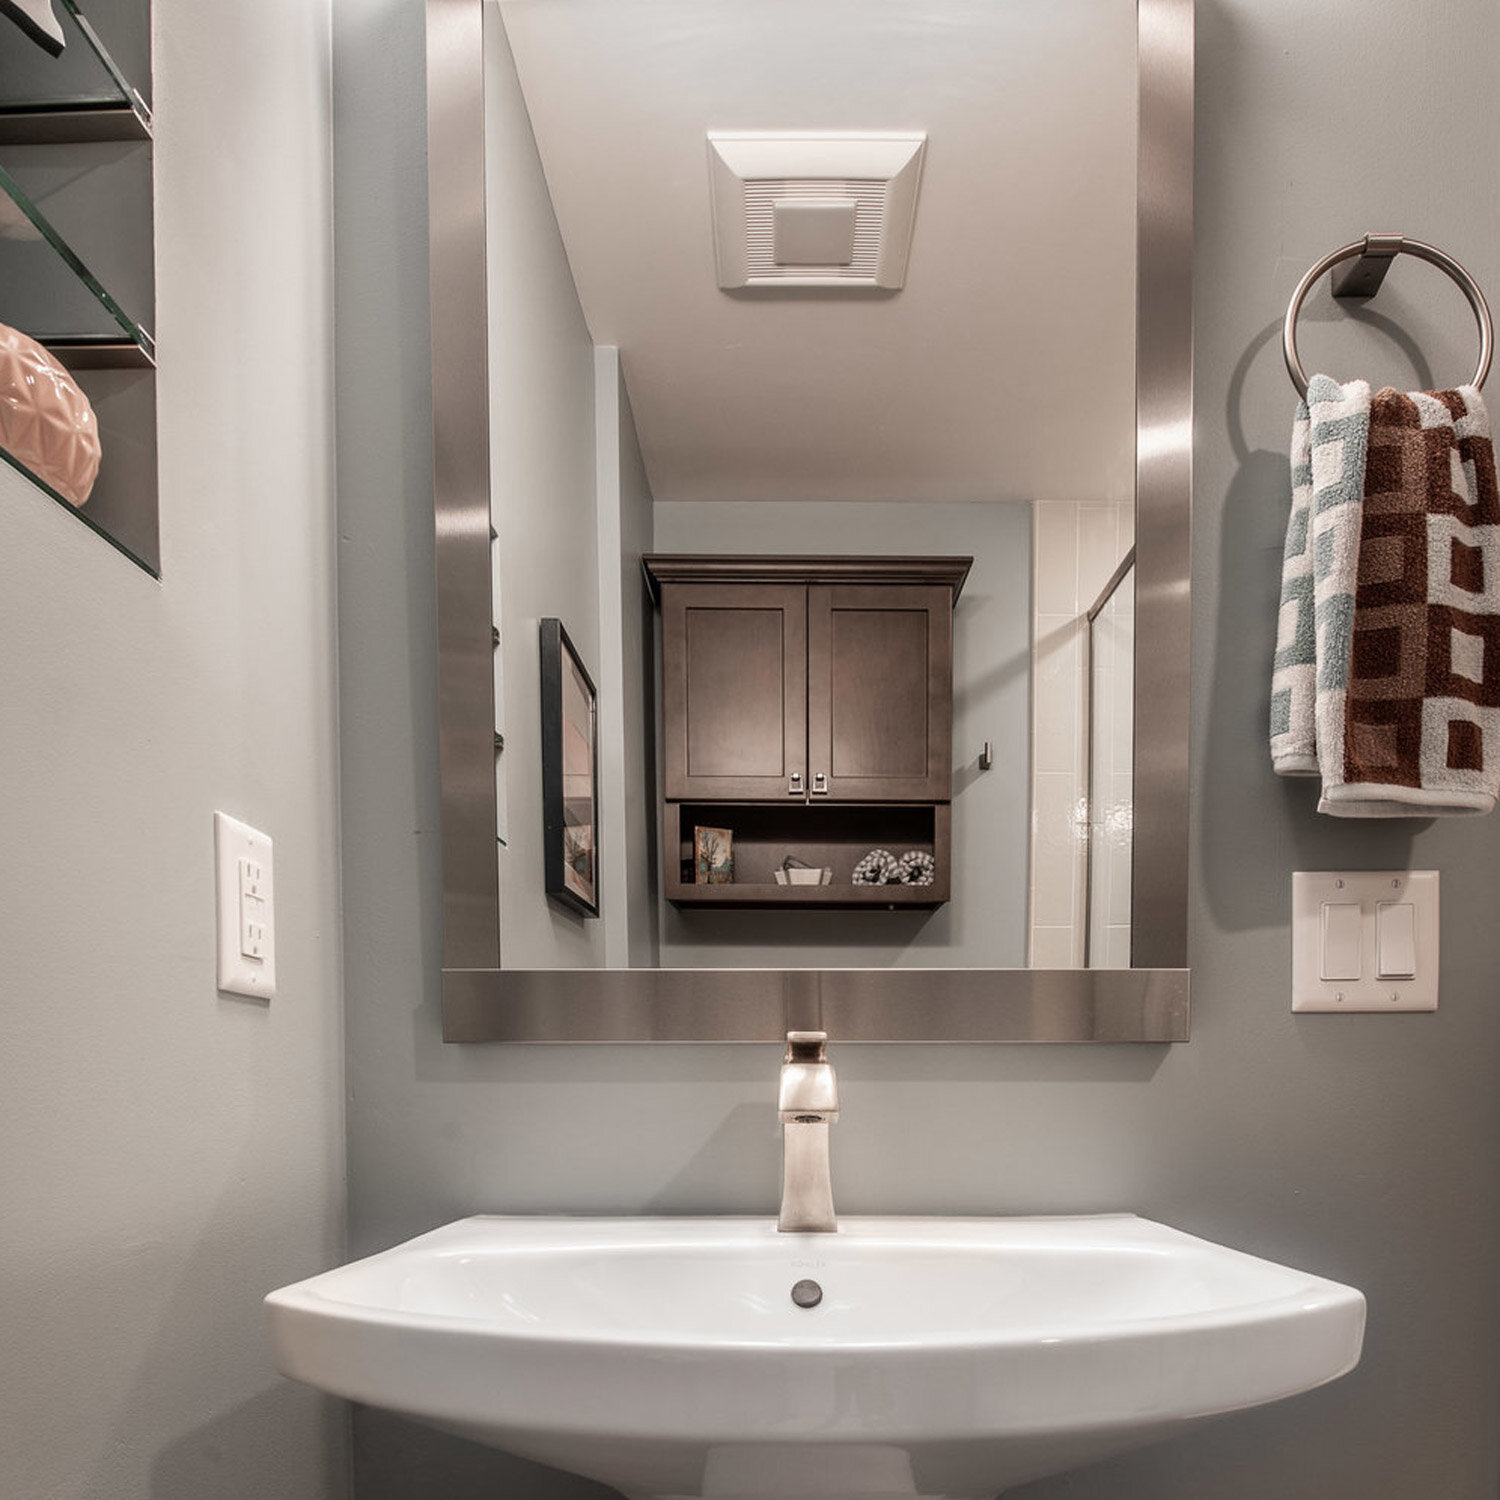 selecting the correct bathroom exhaust fan when remodeling